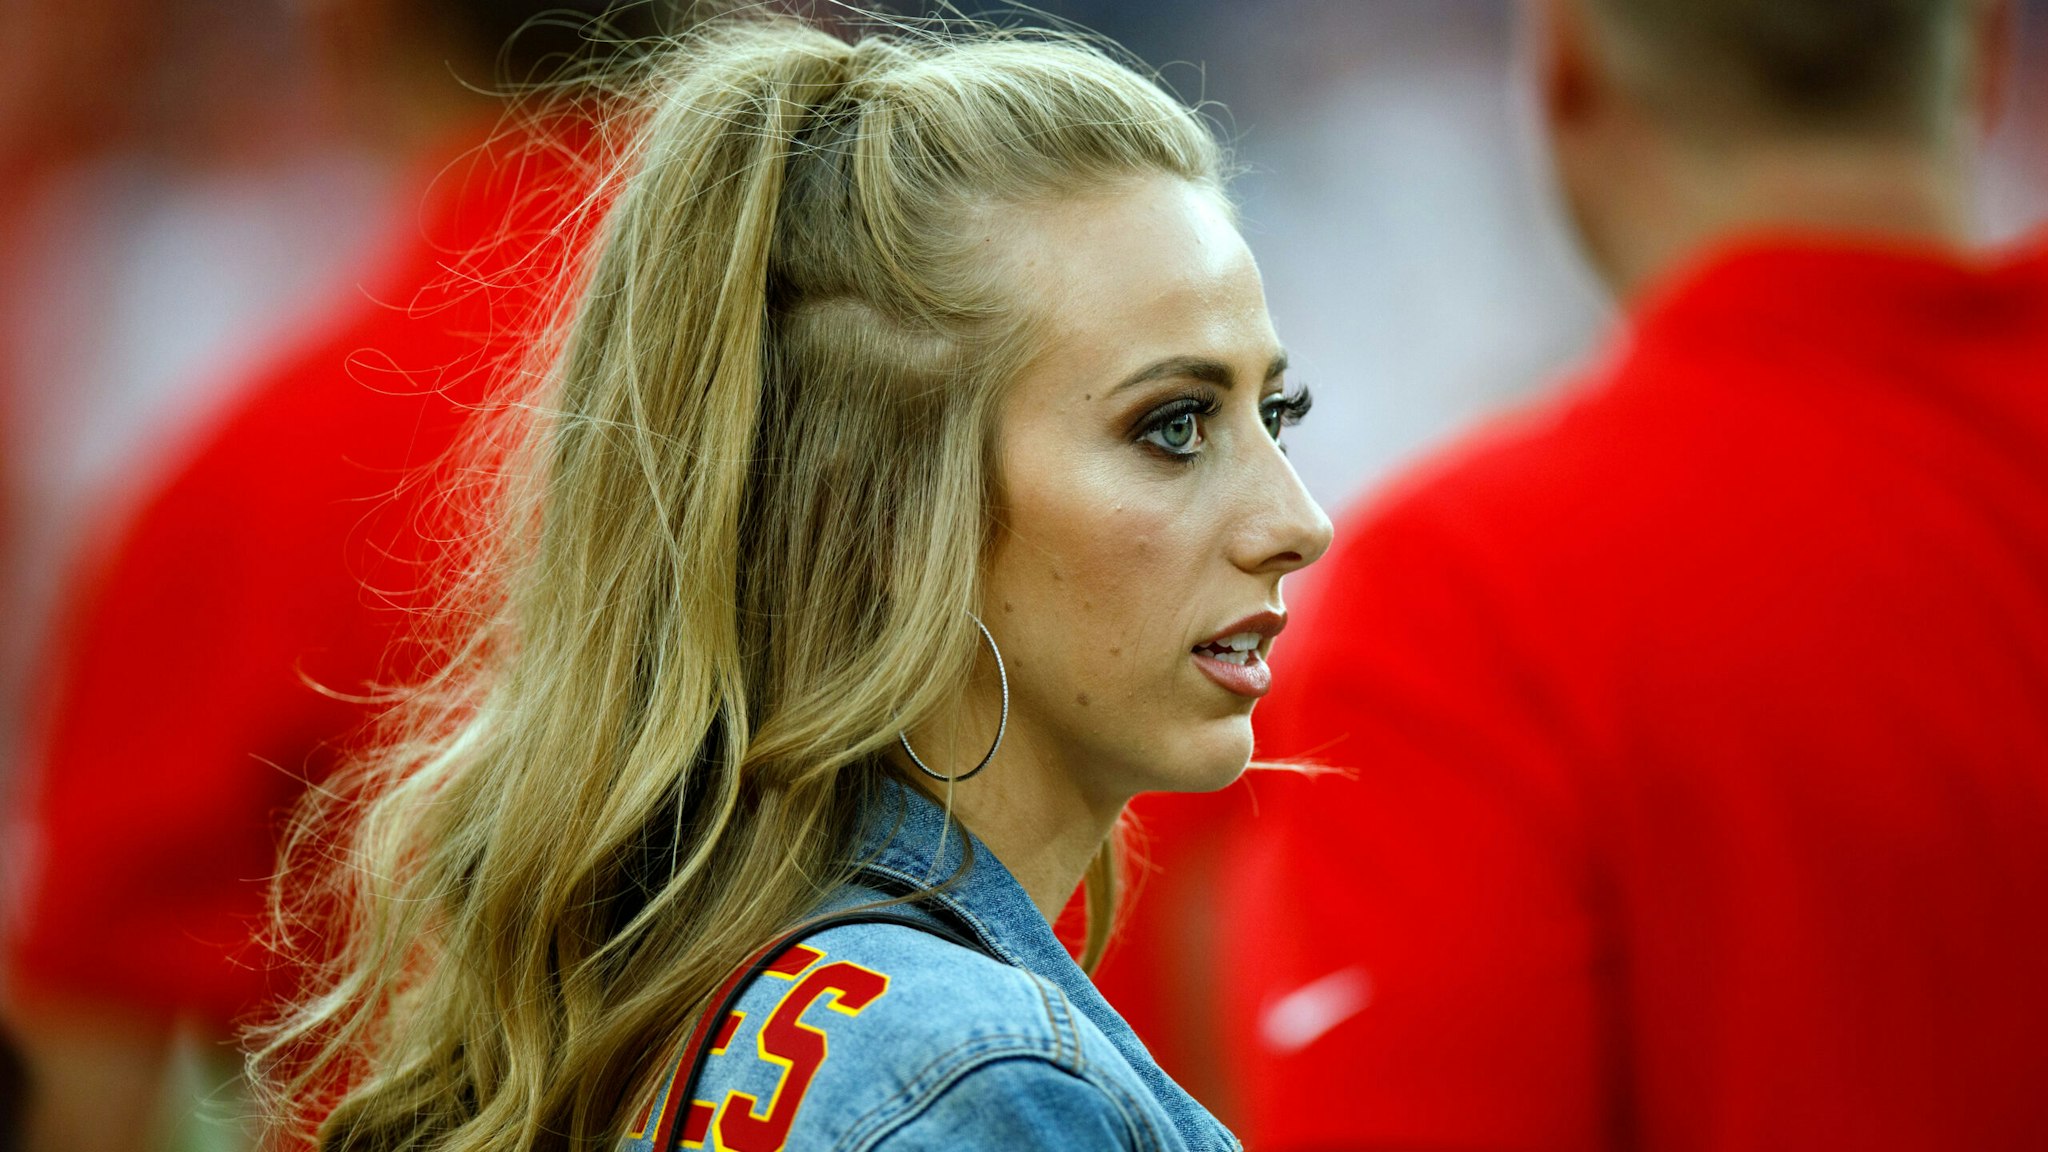 DENVER, CO - OCTOBER 17: Brittany Matthews, girlfriend of quarterback Patrick Mahomes of the Kansas City Chiefs, looks on before a game against the Denver Broncos at Empower Field at Mile High on October 17, 2019 in Denver, Colorado.